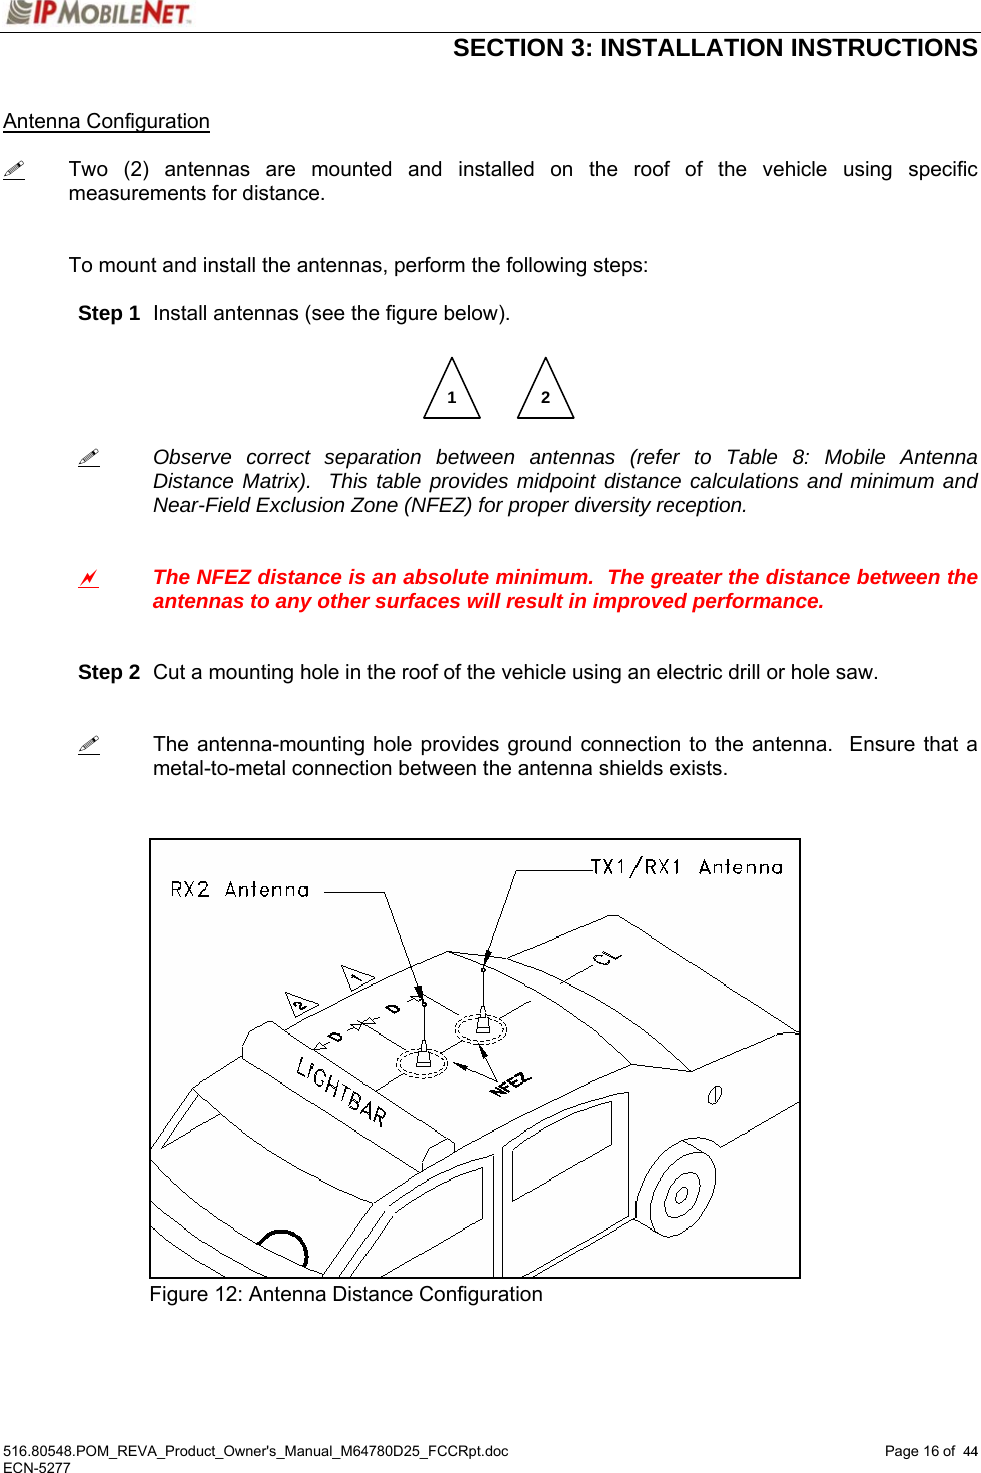  SECTION 3: INSTALLATION INSTRUCTIONS  516.80548.POM_REVA_Product_Owner&apos;s_Manual_M64780D25_FCCRpt.doc Page 16 of  44 ECN-5277  44 Antenna Configuration   Two (2) antennas are mounted and installed on the roof of the vehicle using specific measurements for distance.   To mount and install the antennas, perform the following steps:   Step 1  Install antennas (see the figure below).           Observe correct separation between antennas (refer to Table 8: Mobile Antenna   Distance Matrix).  This table provides midpoint distance calculations and minimum and   Near-Field Exclusion Zone (NFEZ) for proper diversity reception.    a The NFEZ distance is an absolute minimum.  The greater the distance between the antennas to any other surfaces will result in improved performance.    Step 2  Cut a mounting hole in the roof of the vehicle using an electric drill or hole saw.      The antenna-mounting hole provides ground connection to the antenna.  Ensure that a metal-to-metal connection between the antenna shields exists.                  Figure 12: Antenna Distance Configuration    1  2 